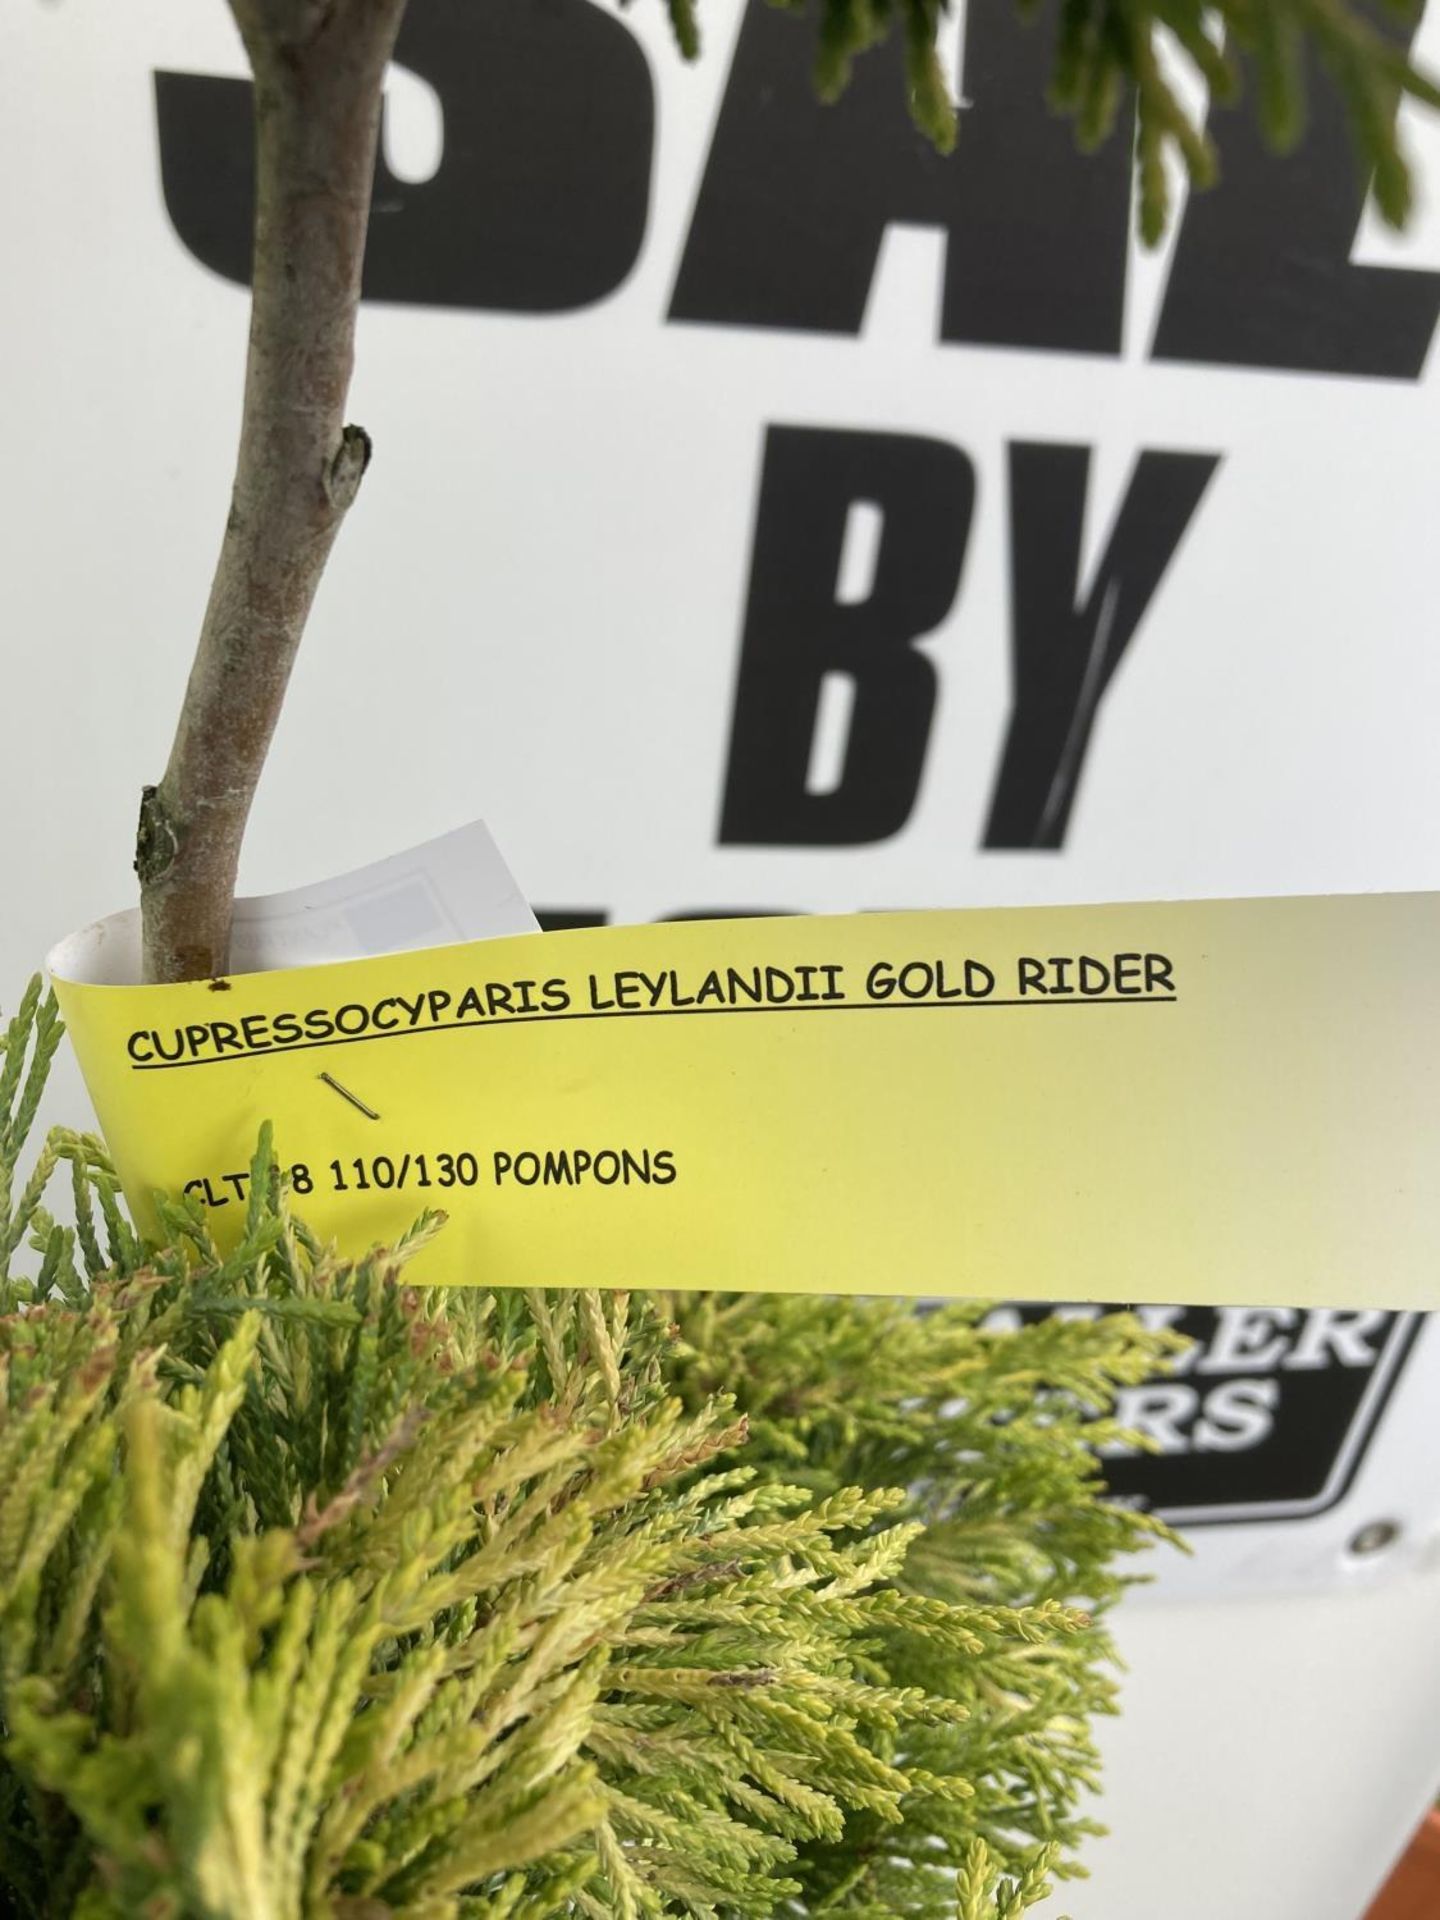 TWO POM POM TREES CUPRESSOCYPARIS LEYLANDII 'GOLD RIDER' APPROX 160CM IN HEIGHT IN 15 LTR POTS - Image 4 of 5